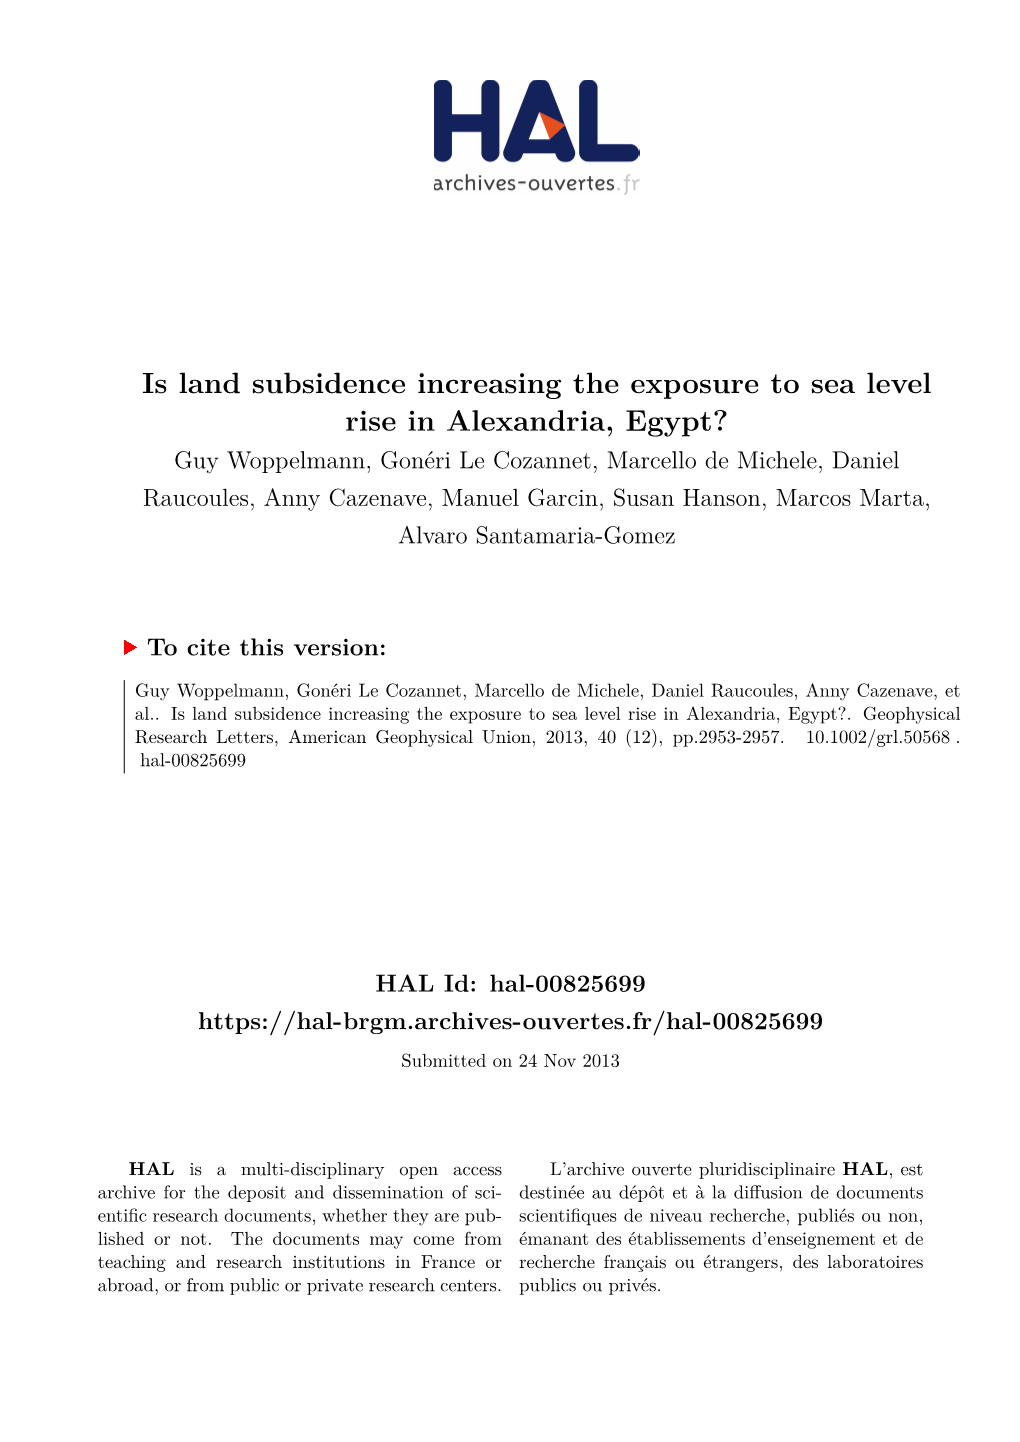 Is Land Subsidence Increasing the Exposure to Sea Level Rise In